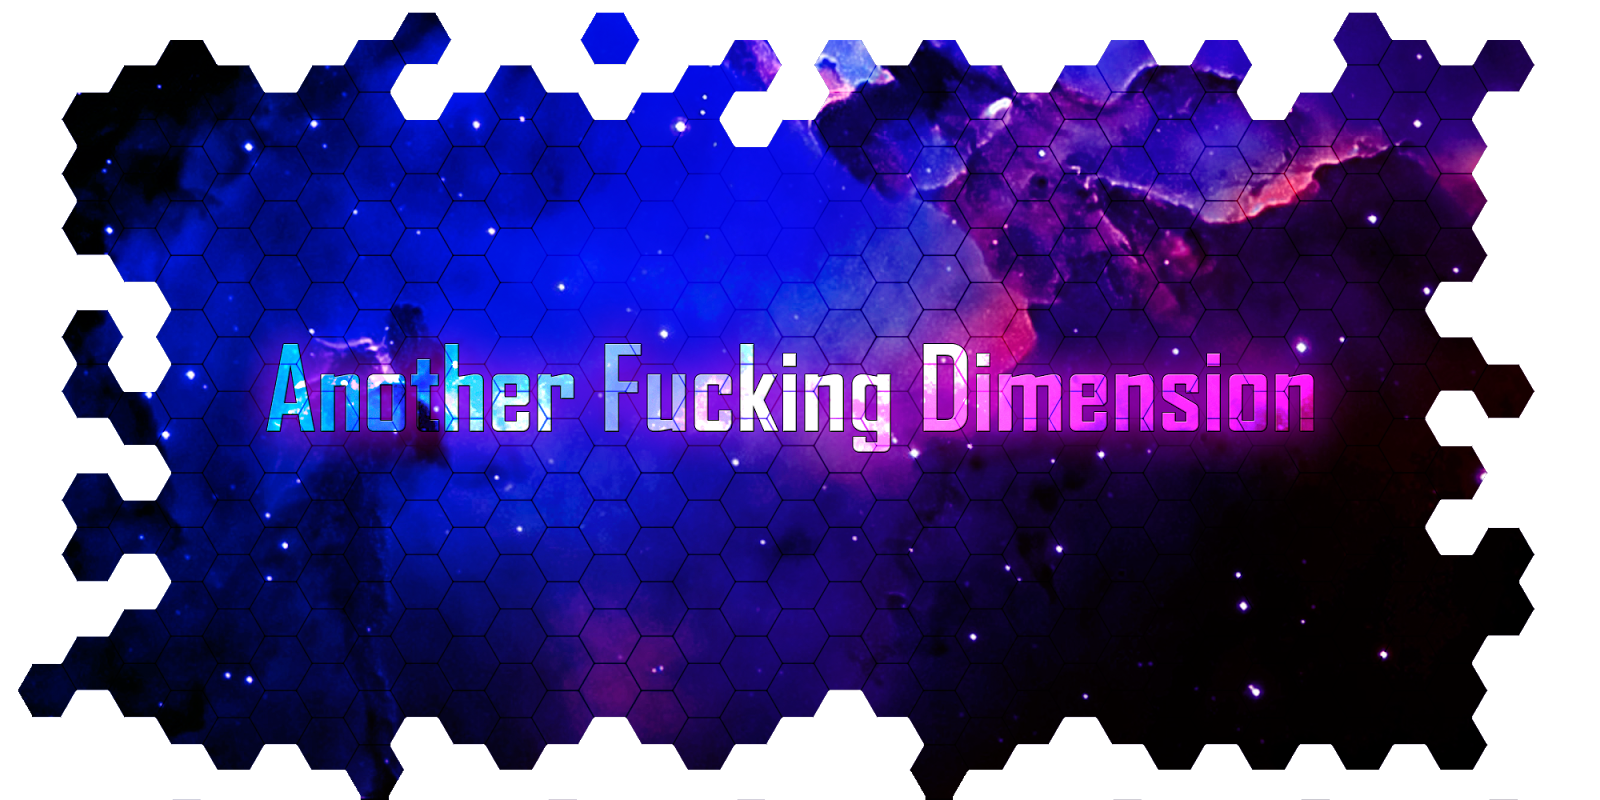 Another Fucking Dimension - Black's Blog